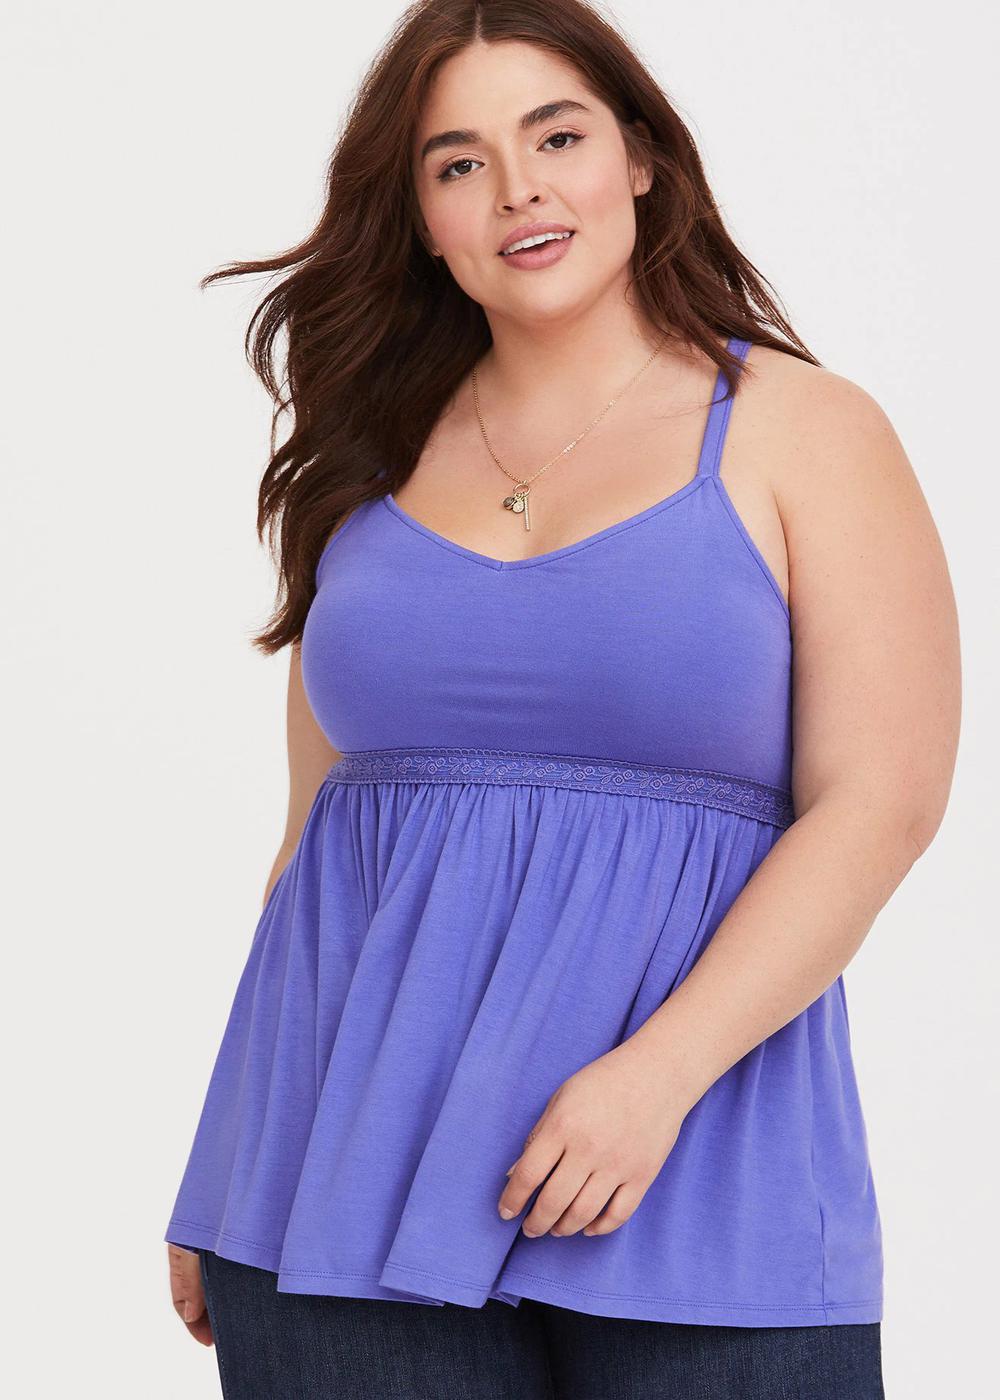 Torrid Similar stores new products store review Q A Modvisor